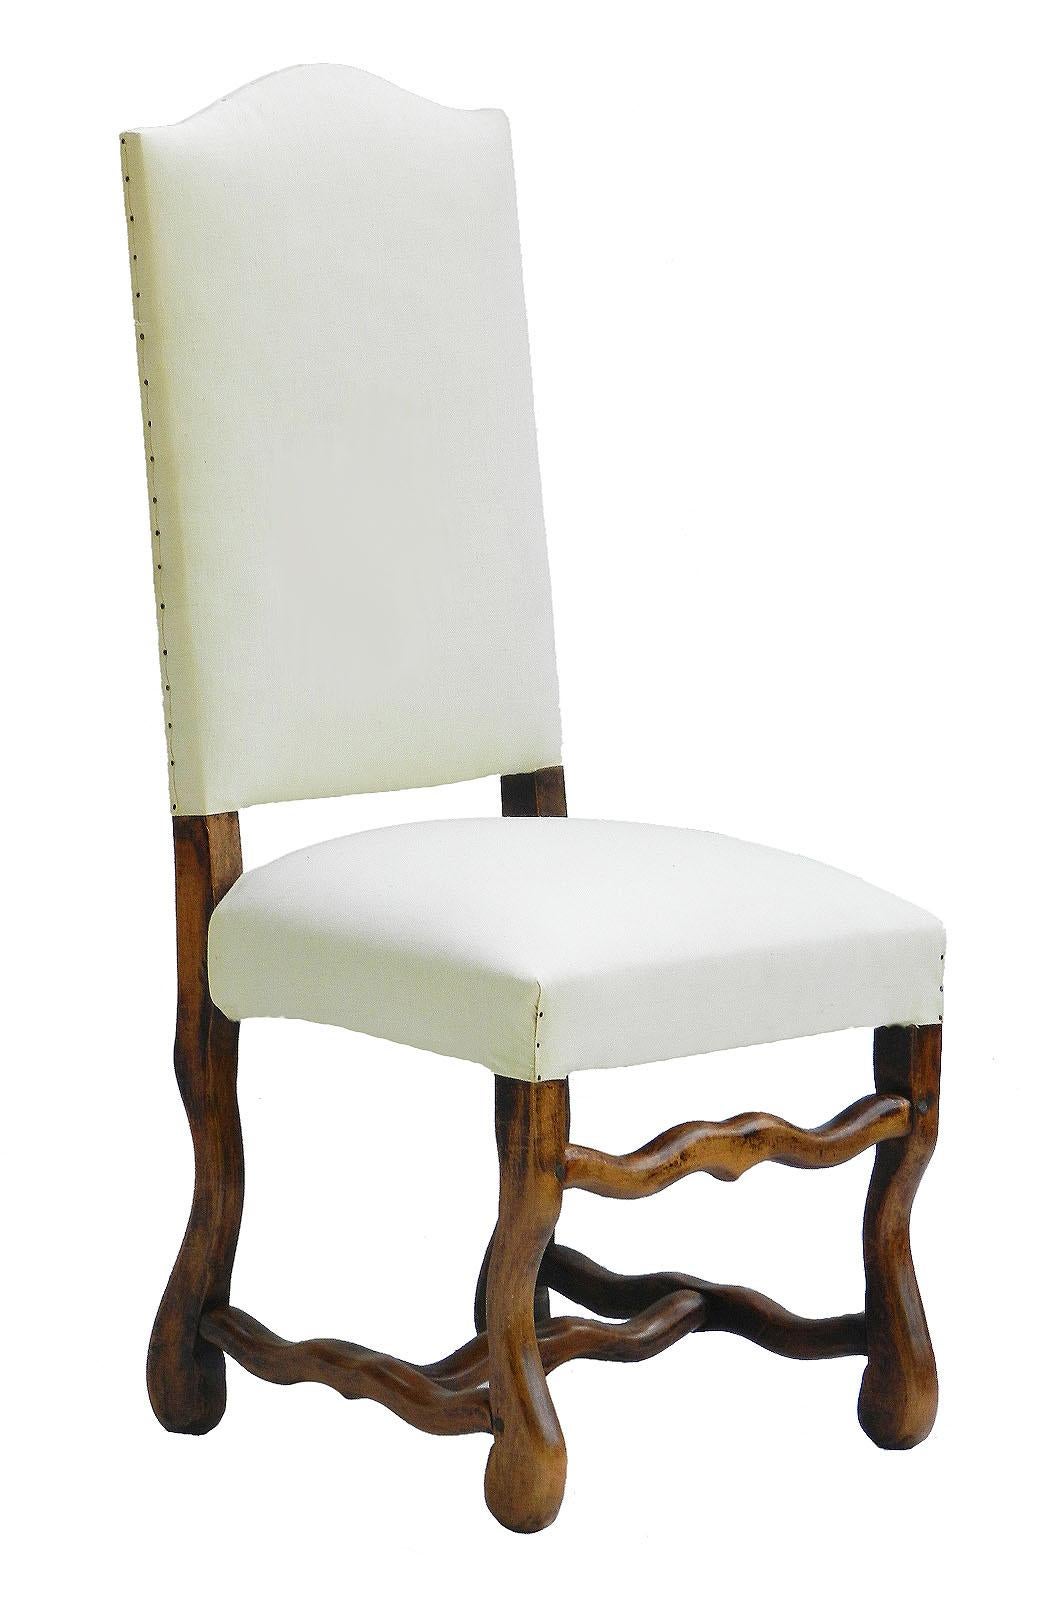 Eight dining chairs Os de Mouton upholstered ready for top covers walnut
French dining chairs, circa 1900.
Very comfortable!
Walnut with superb antique patina
In very good antique condition sound and solid ready for top covers to suit your